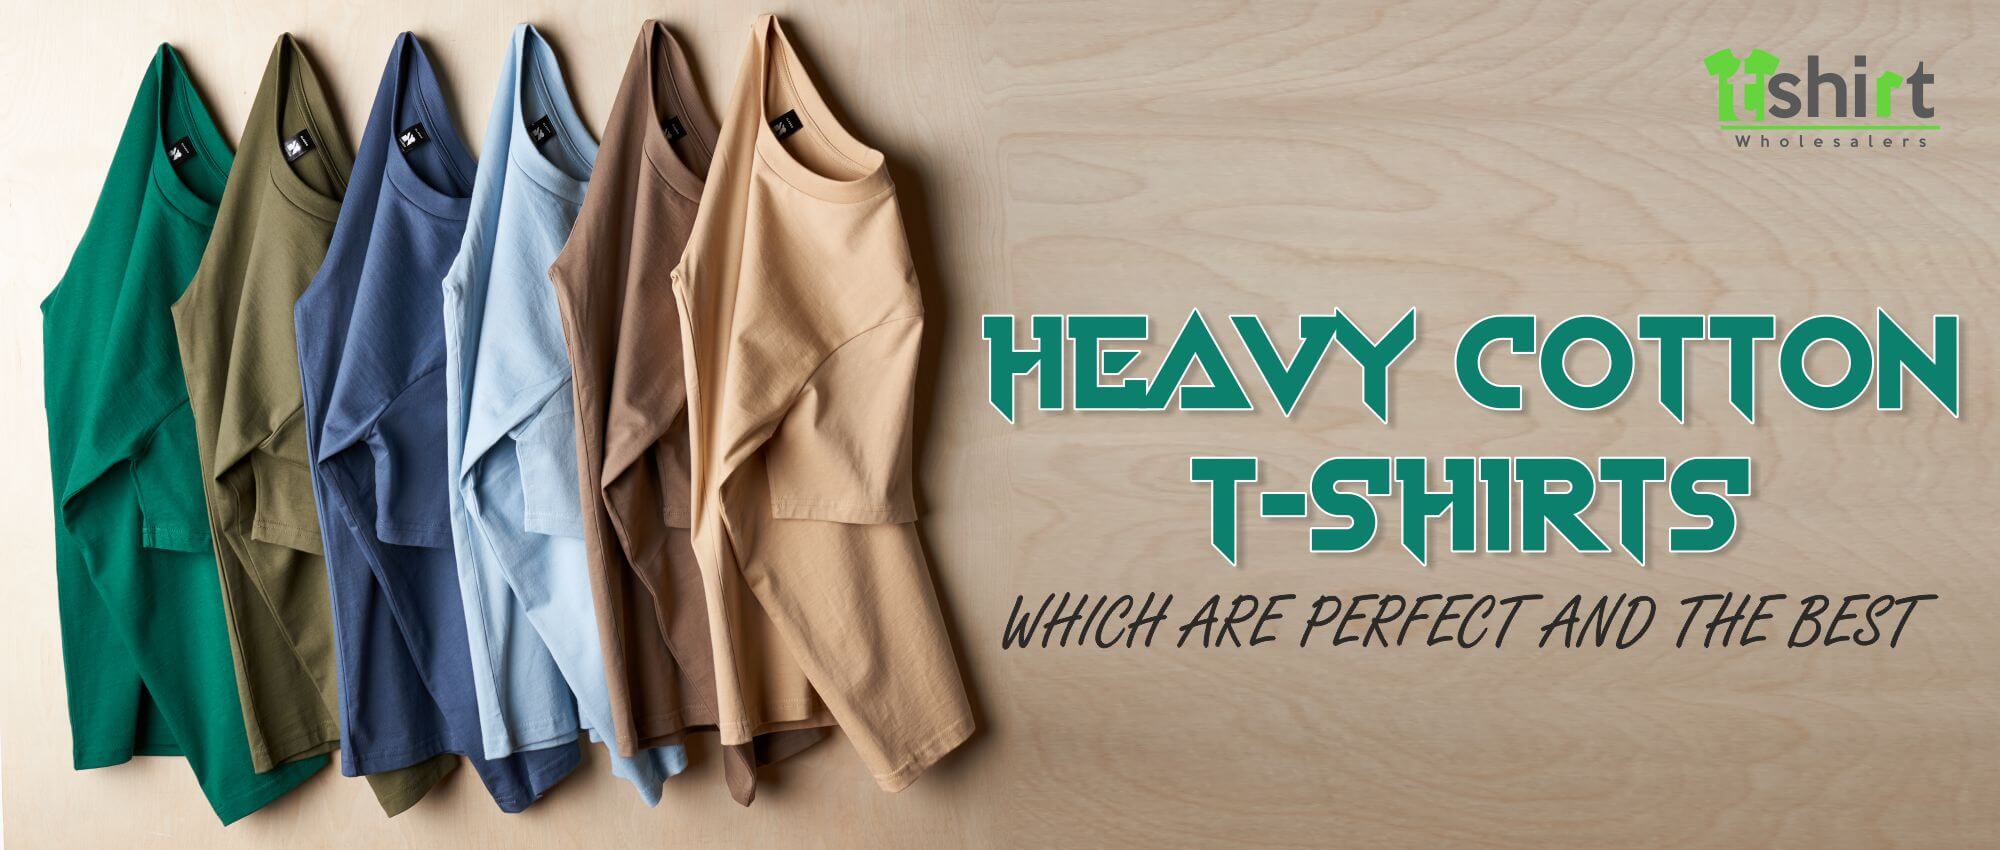 HEAVY COTTON T-SHIRTS WHICH ARE PERFECT AND THE BEST